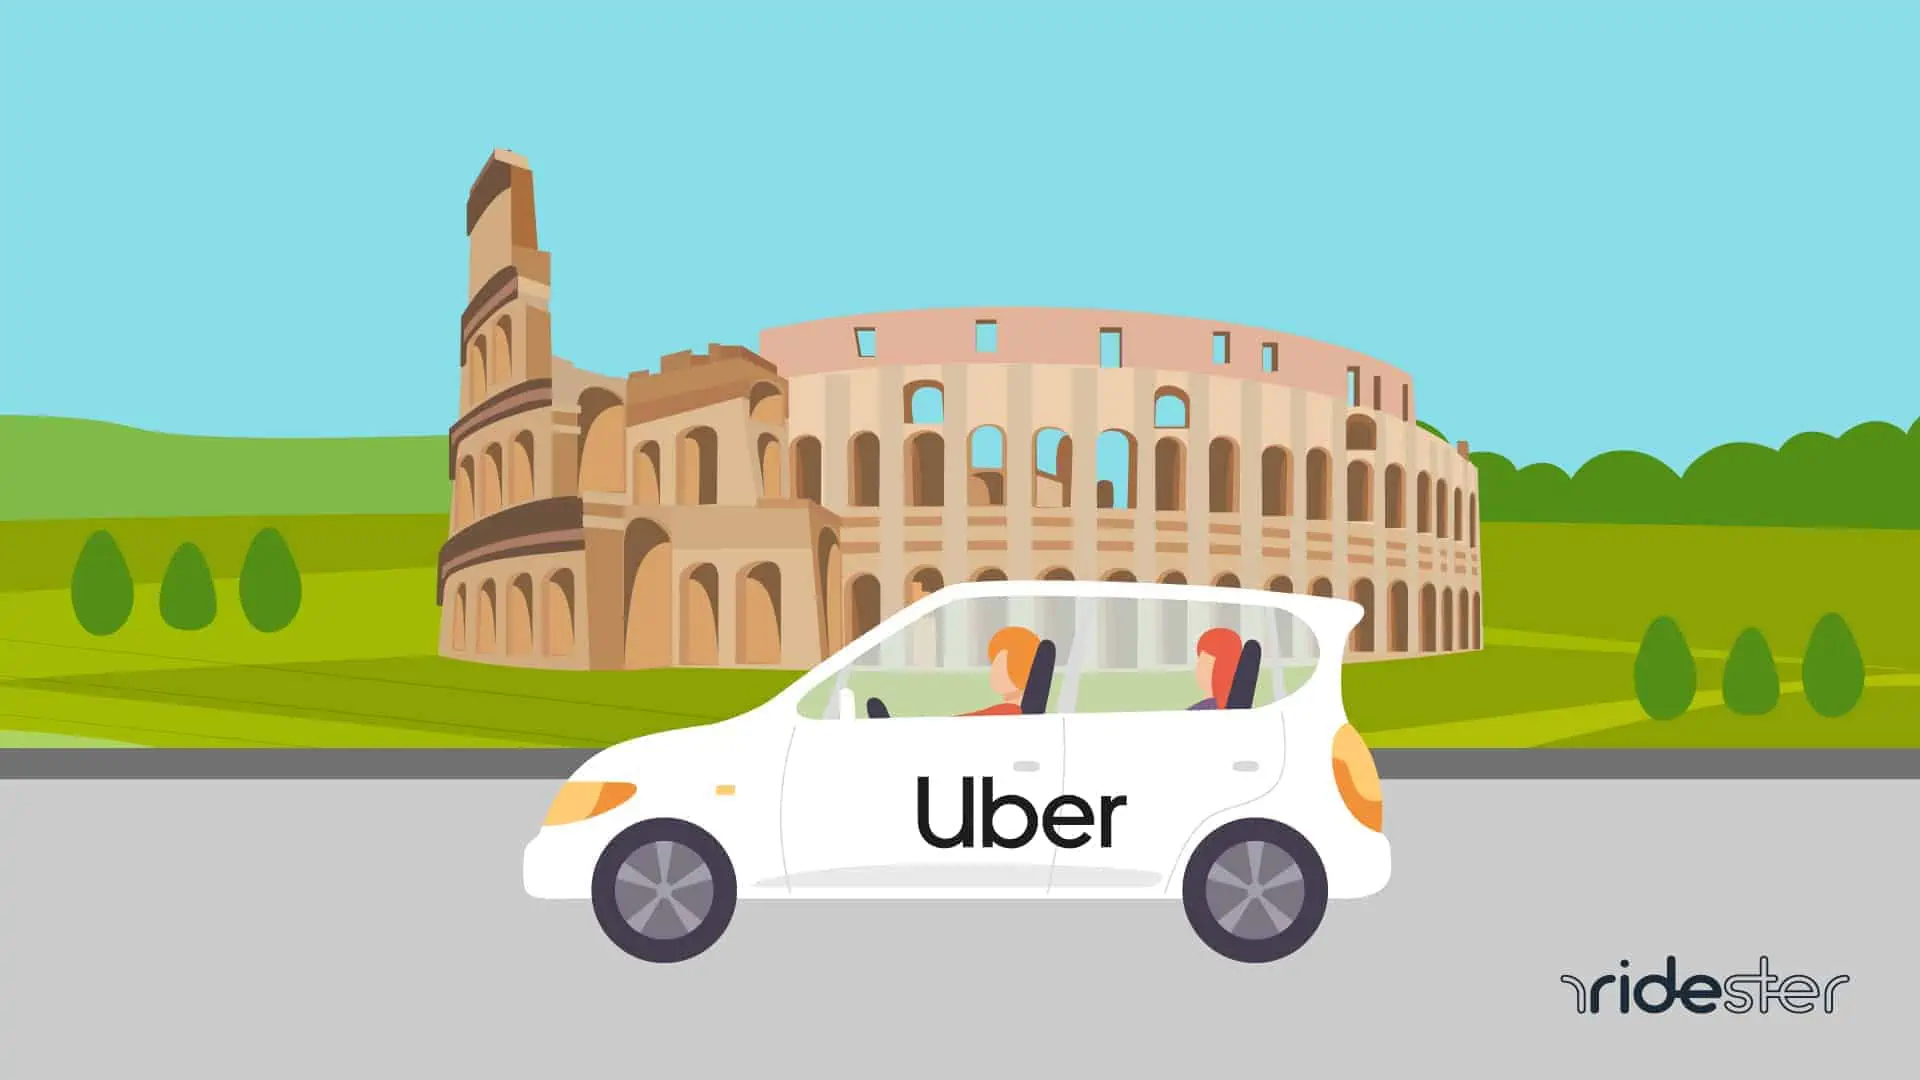 vector graphic showing Uber in Italy - a branded vehicle with the uber logo on it in front of the colosseum